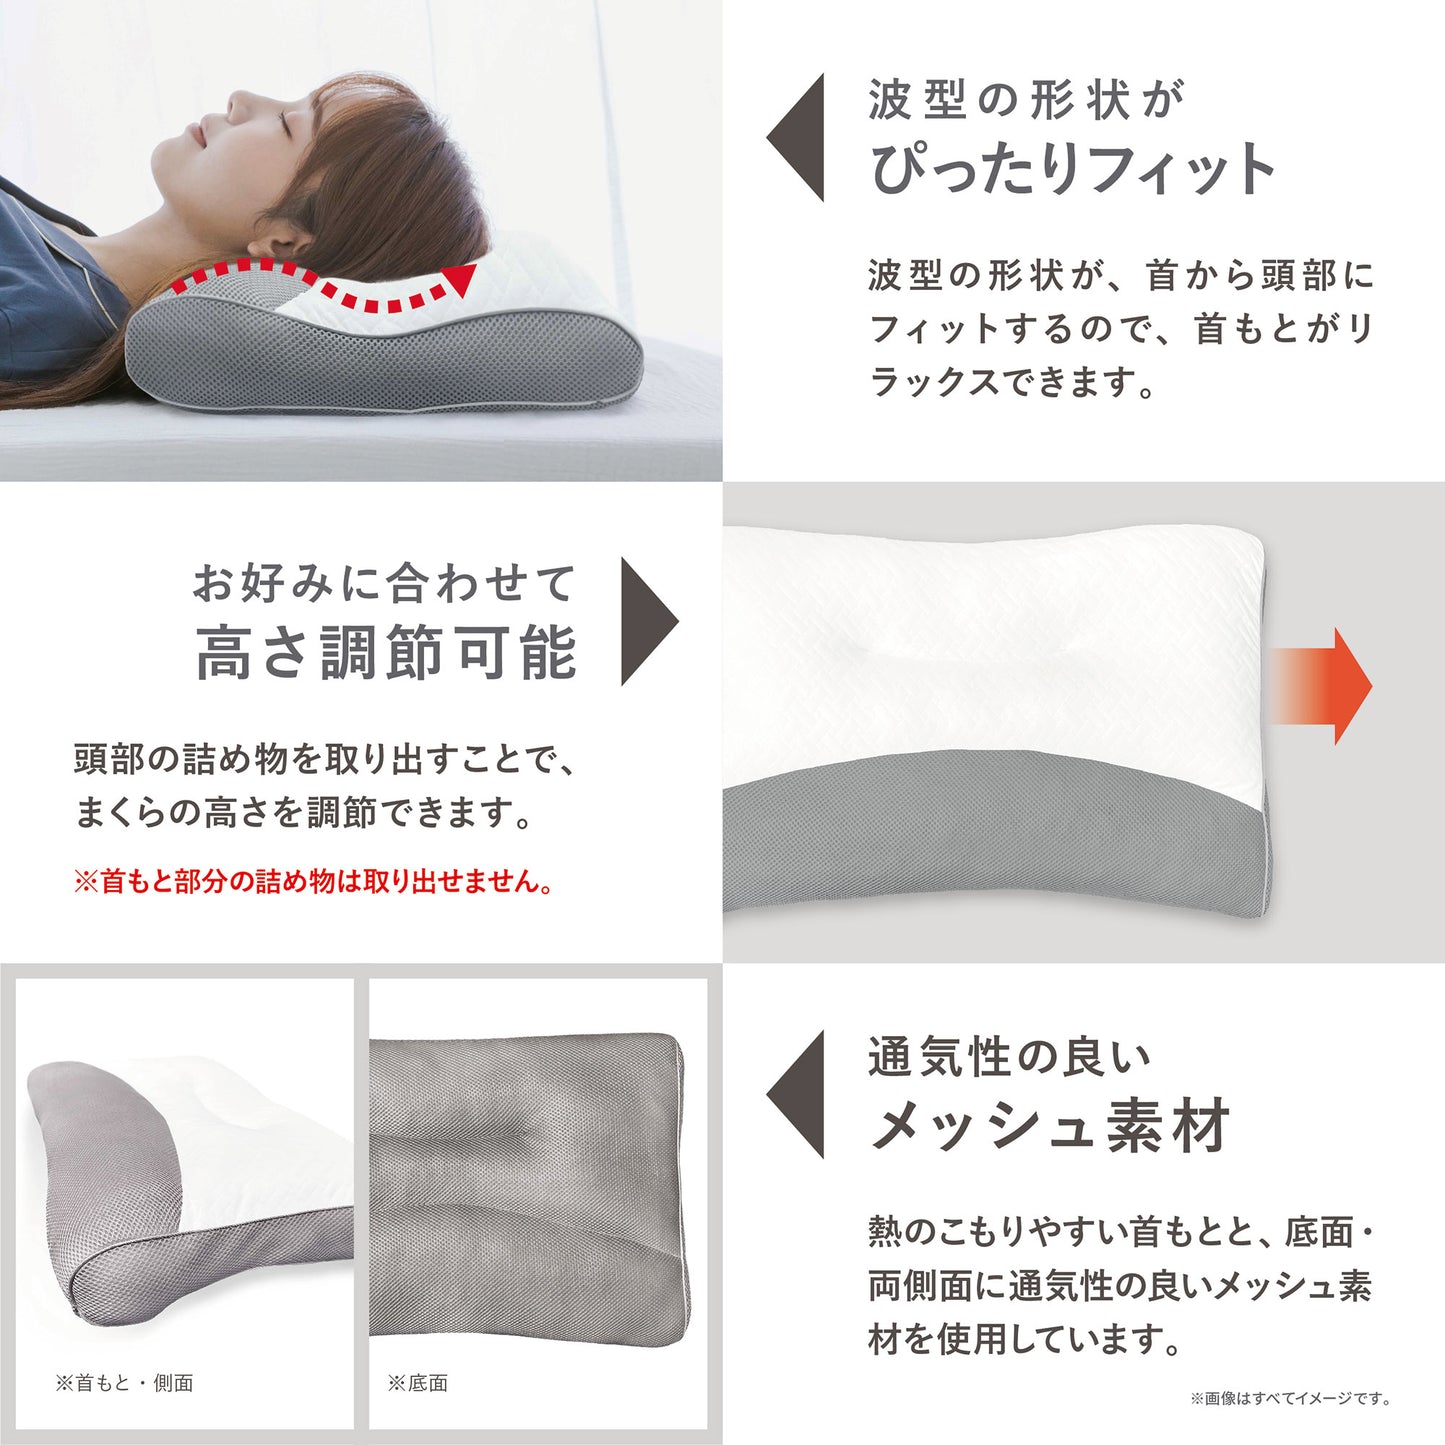 Pillow to rest your neck, low rebound type